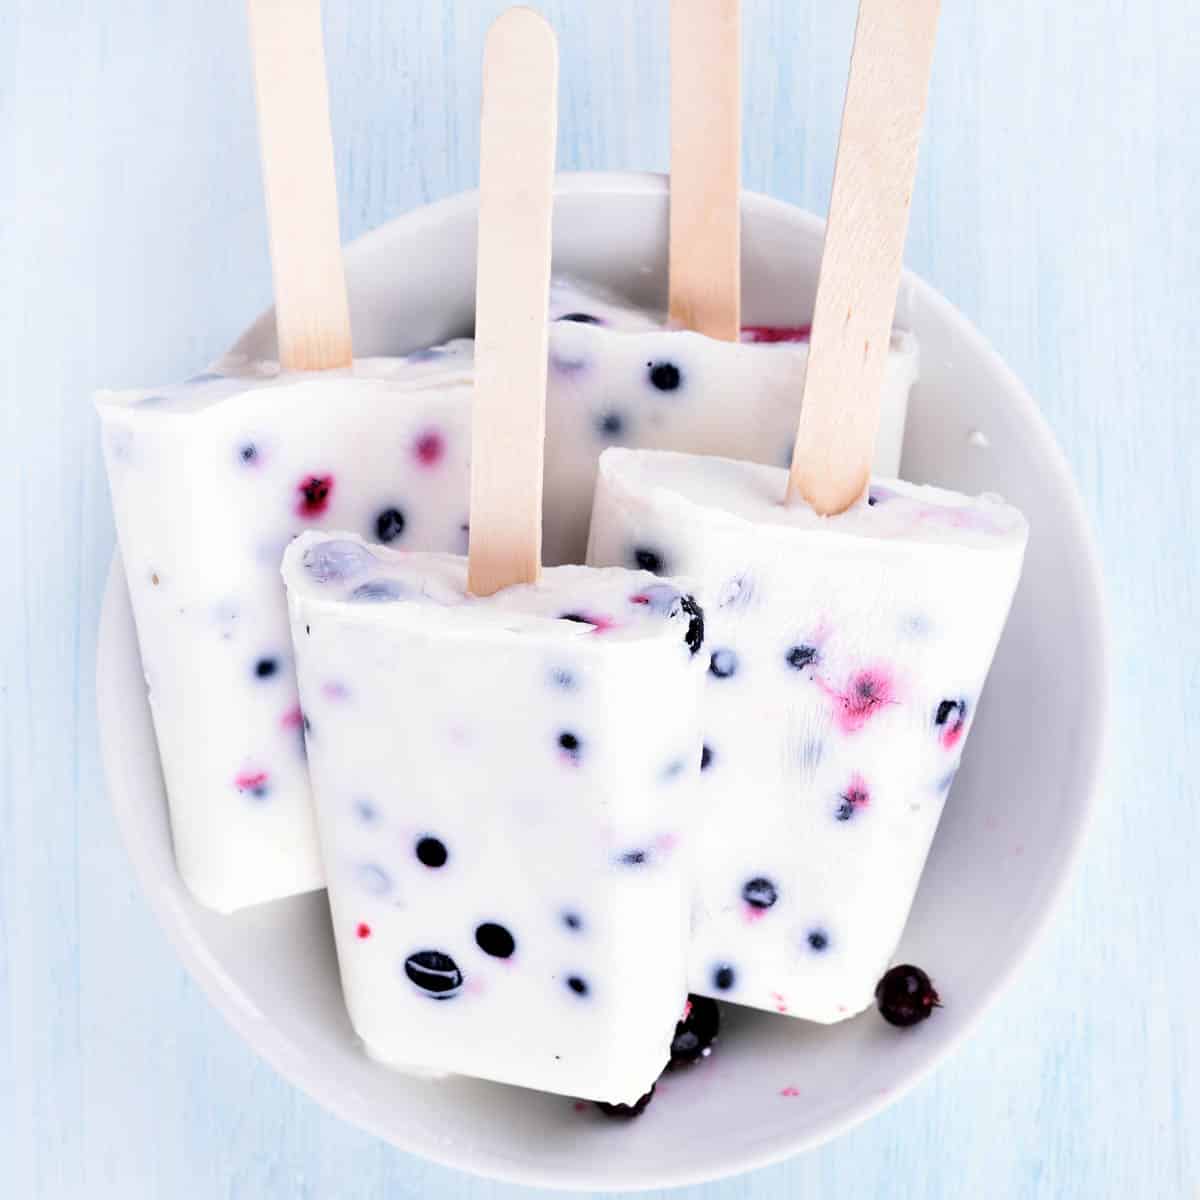 Frozen yogurt popsicles with blueberries in a bowl.